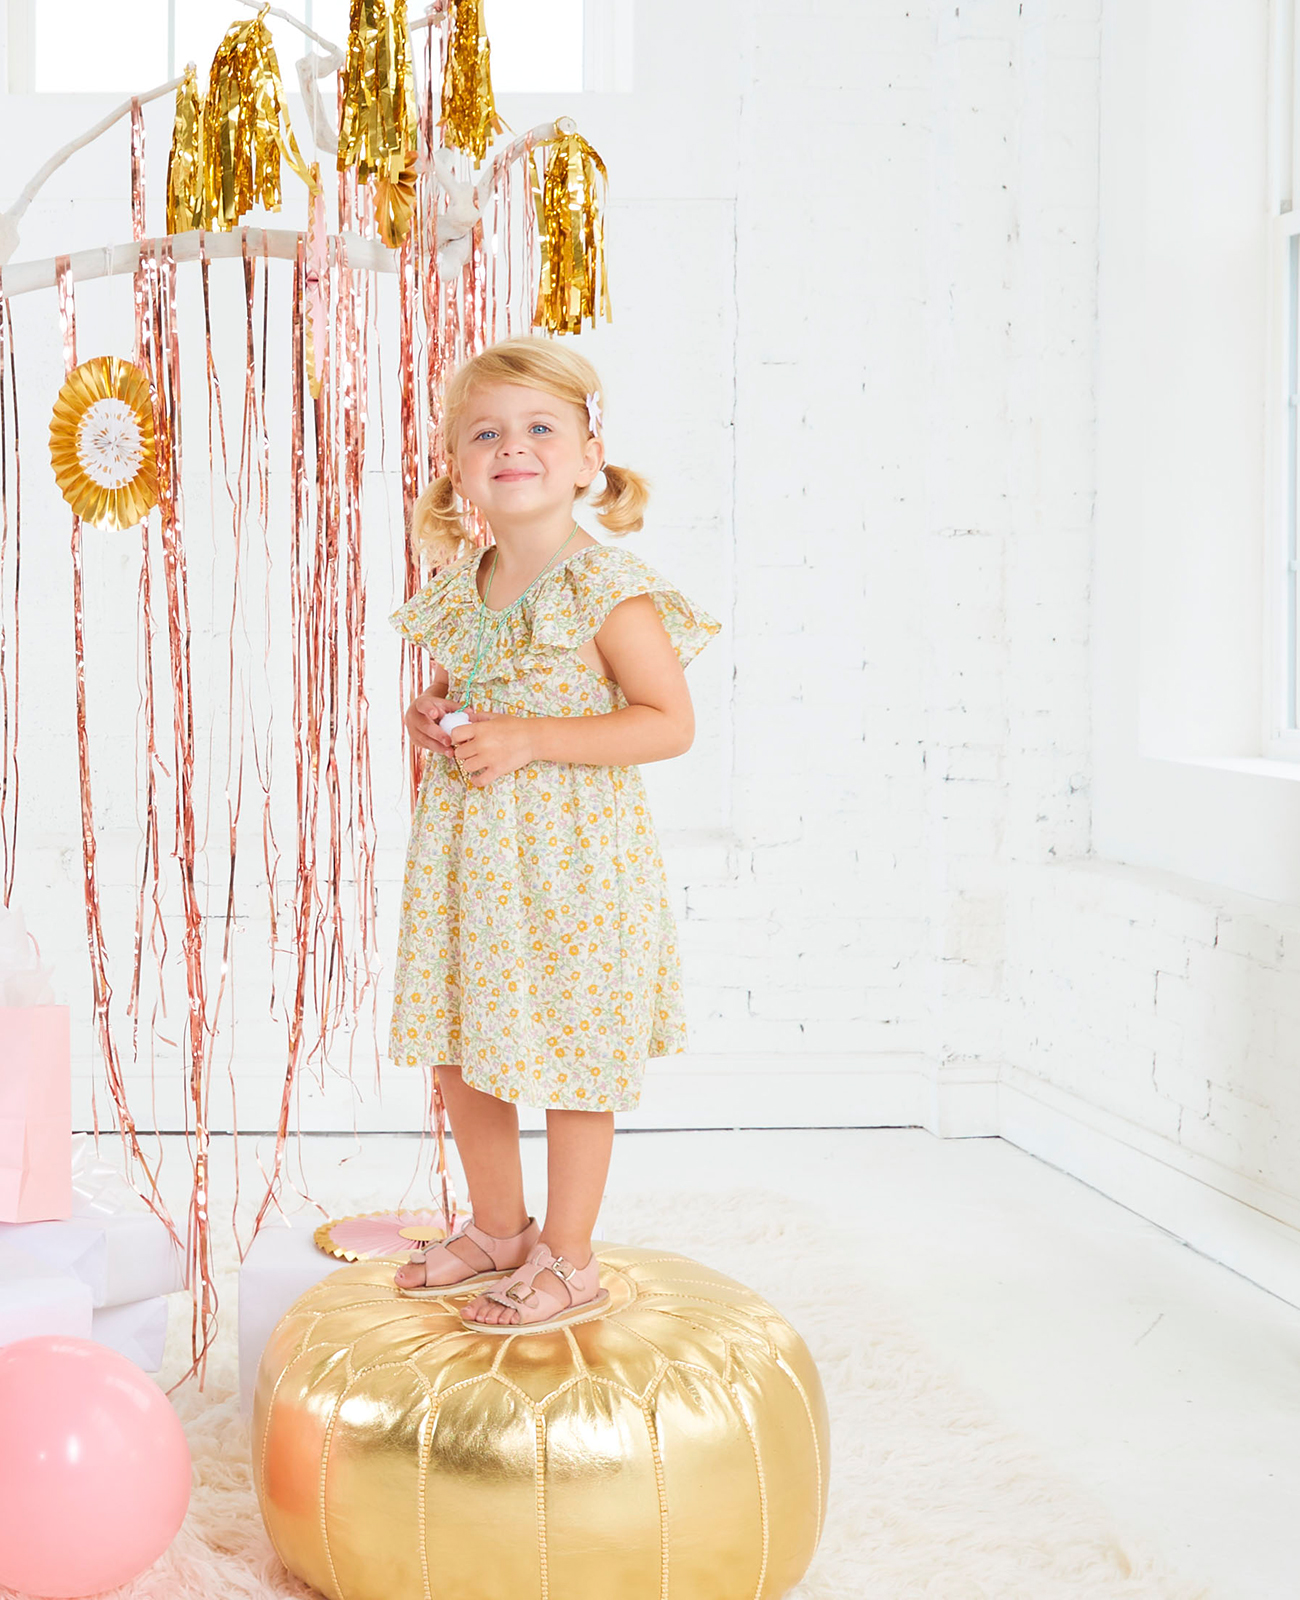 Young girl in a dress standing on gold pouf with gold streamers hanging from white painted tree